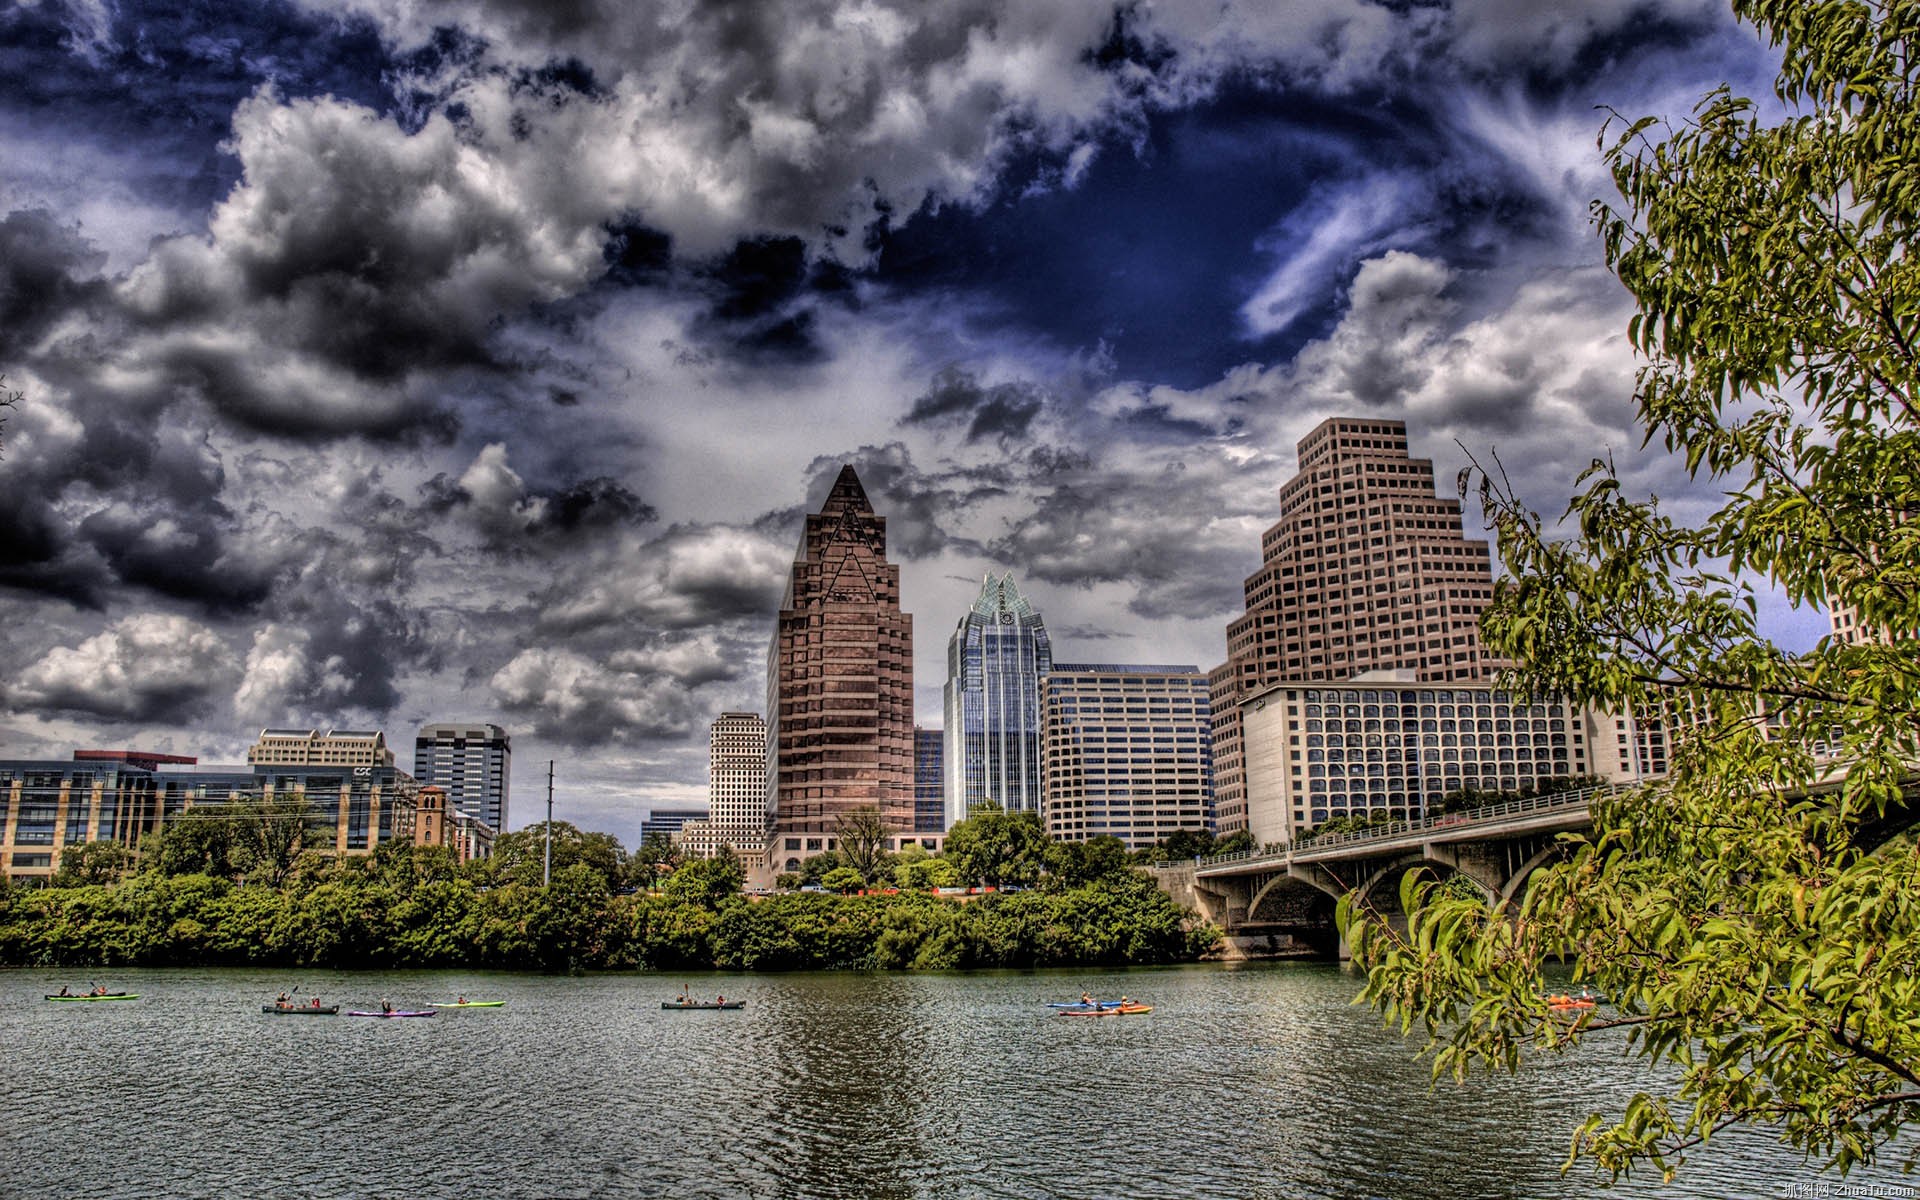 350 Austin Texas Pictures Scenic Travel Photos  Download Free Images on  Unsplash